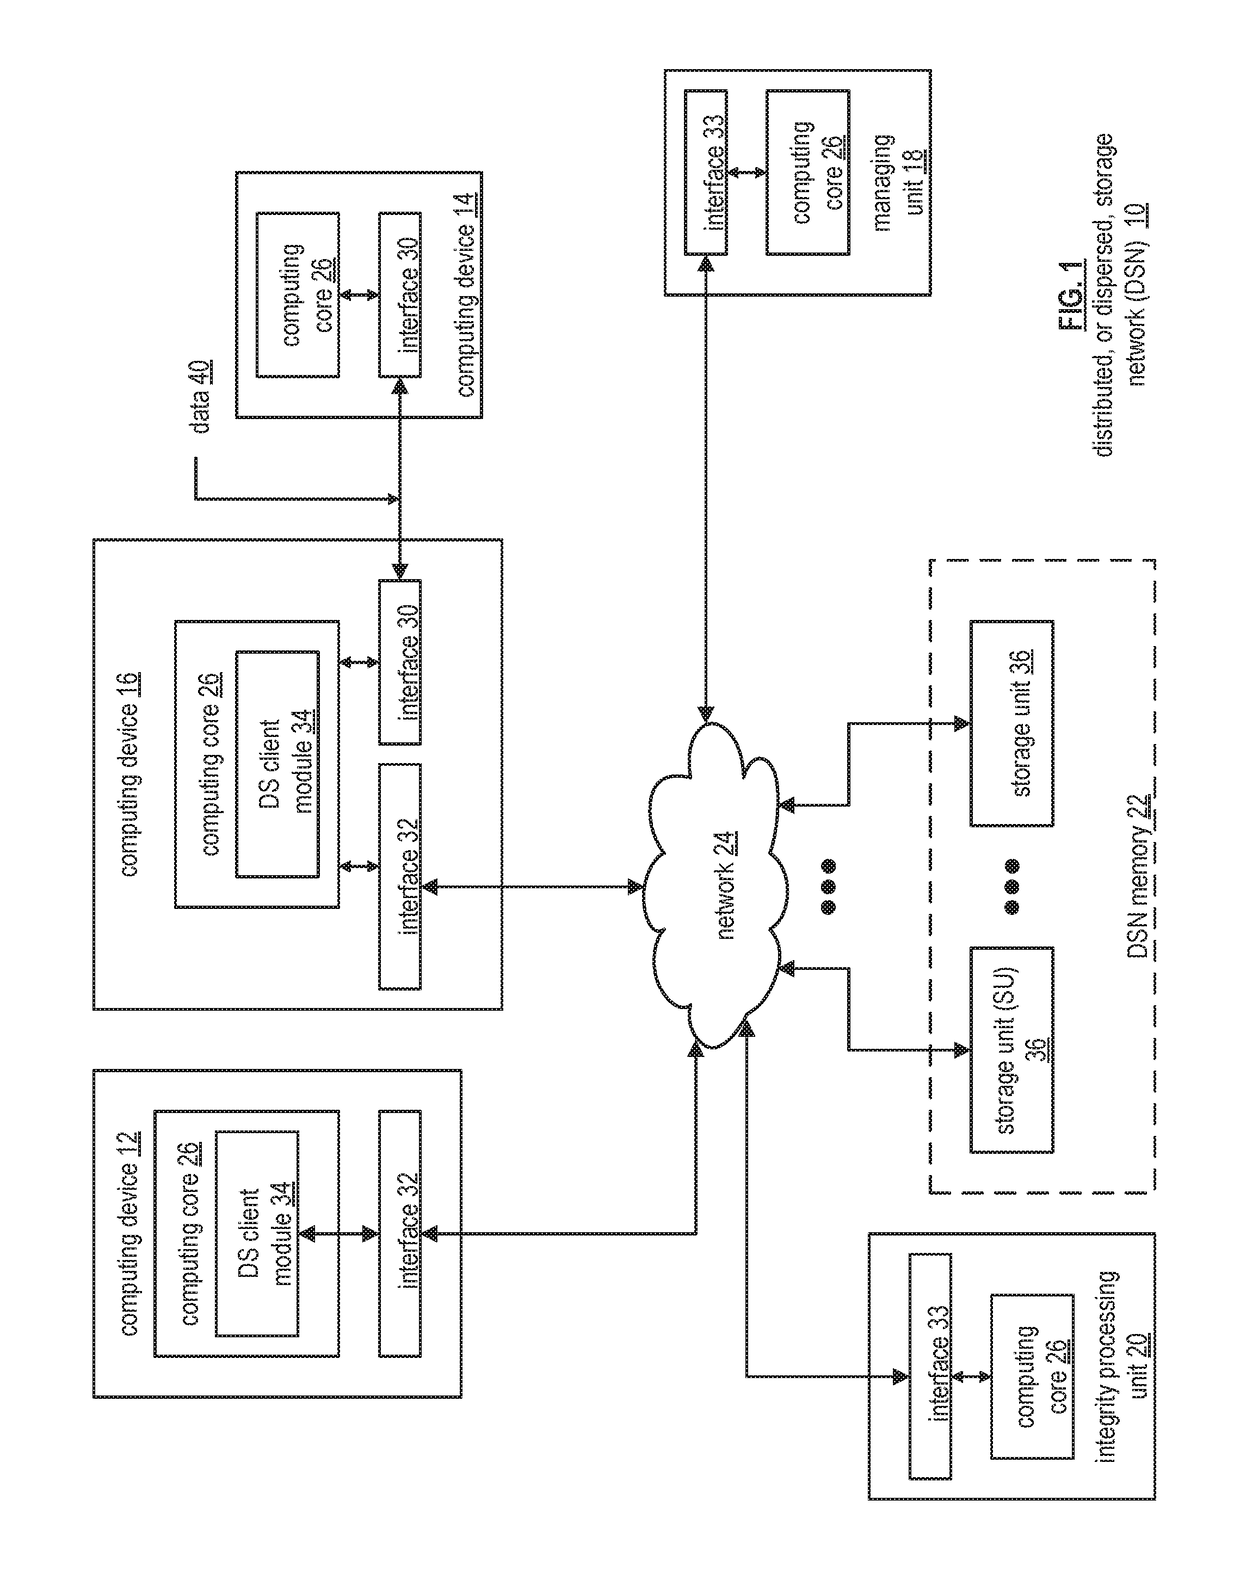 Process to migrate named objects to a dispersed or distributed storage network (DSN)